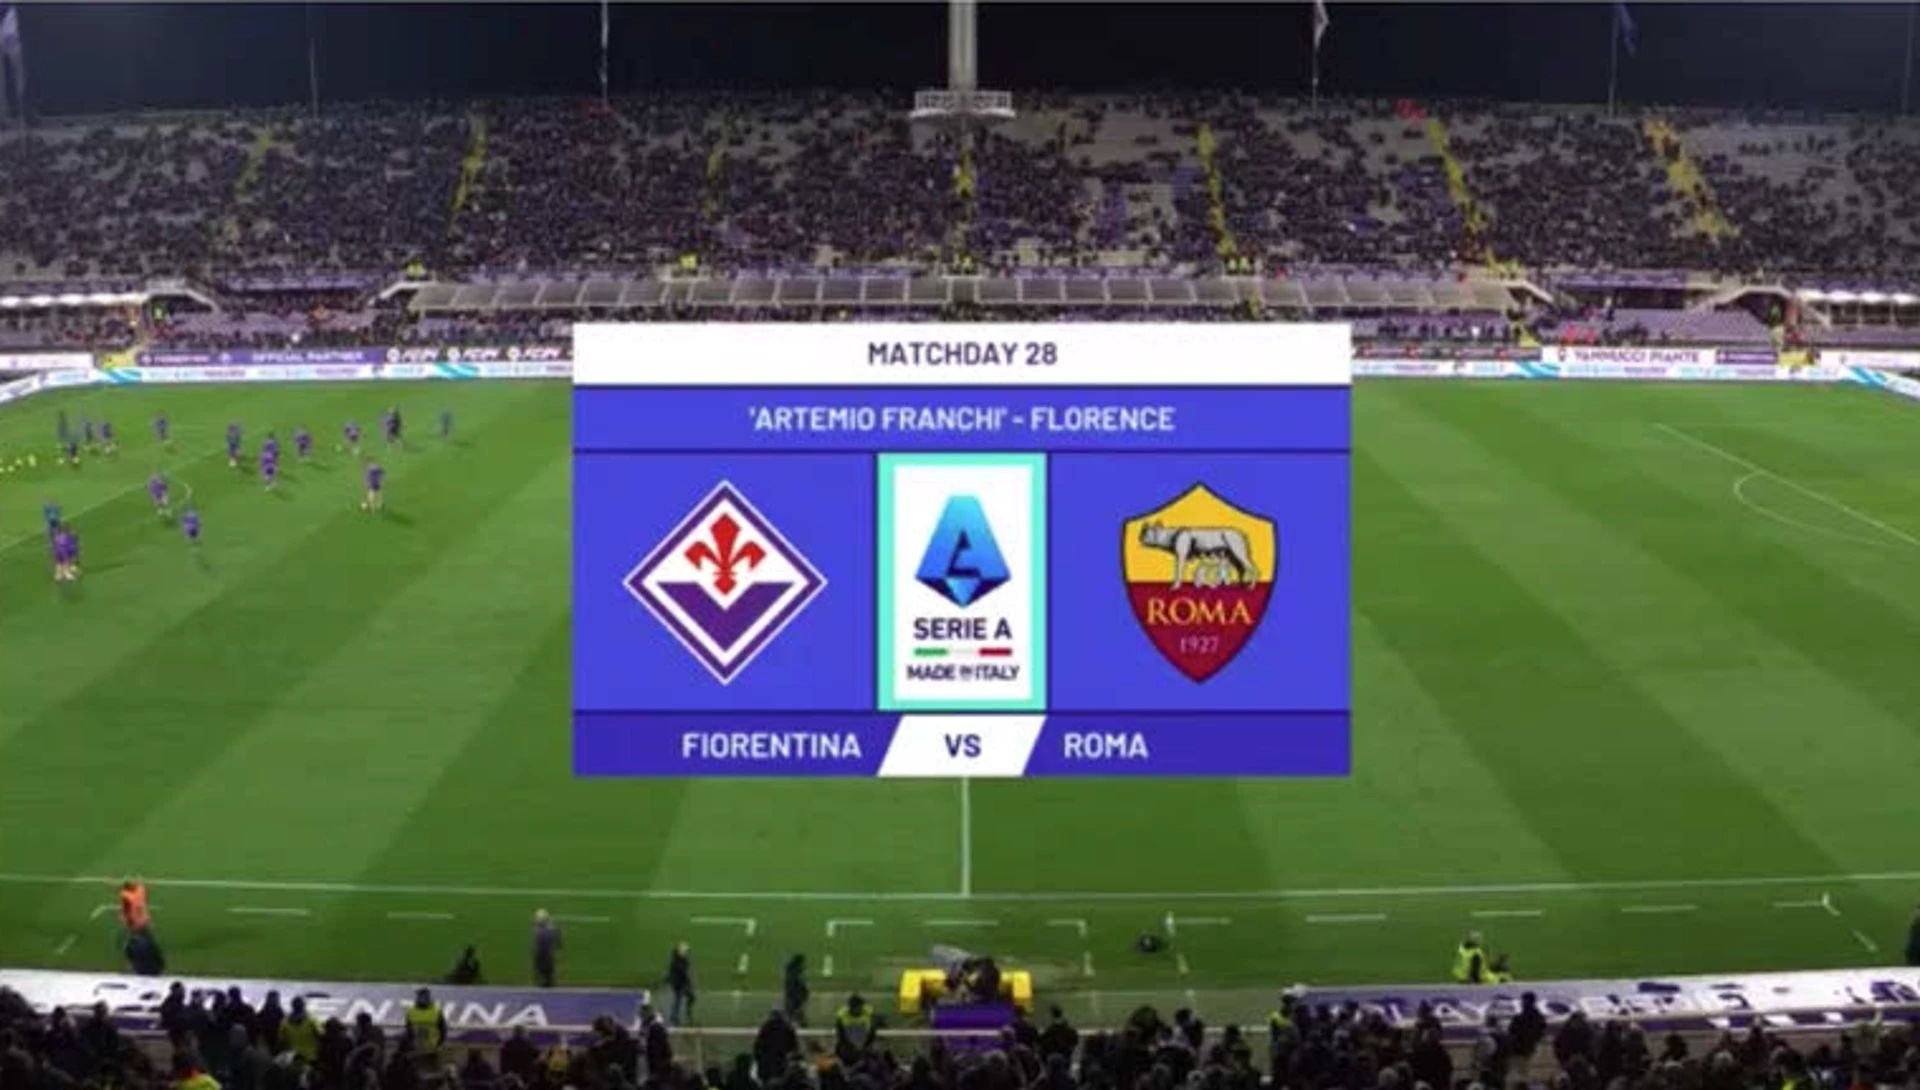 ACF Fiorentina v AS Roma | Match Highlights | Matchday 28 | Serie A